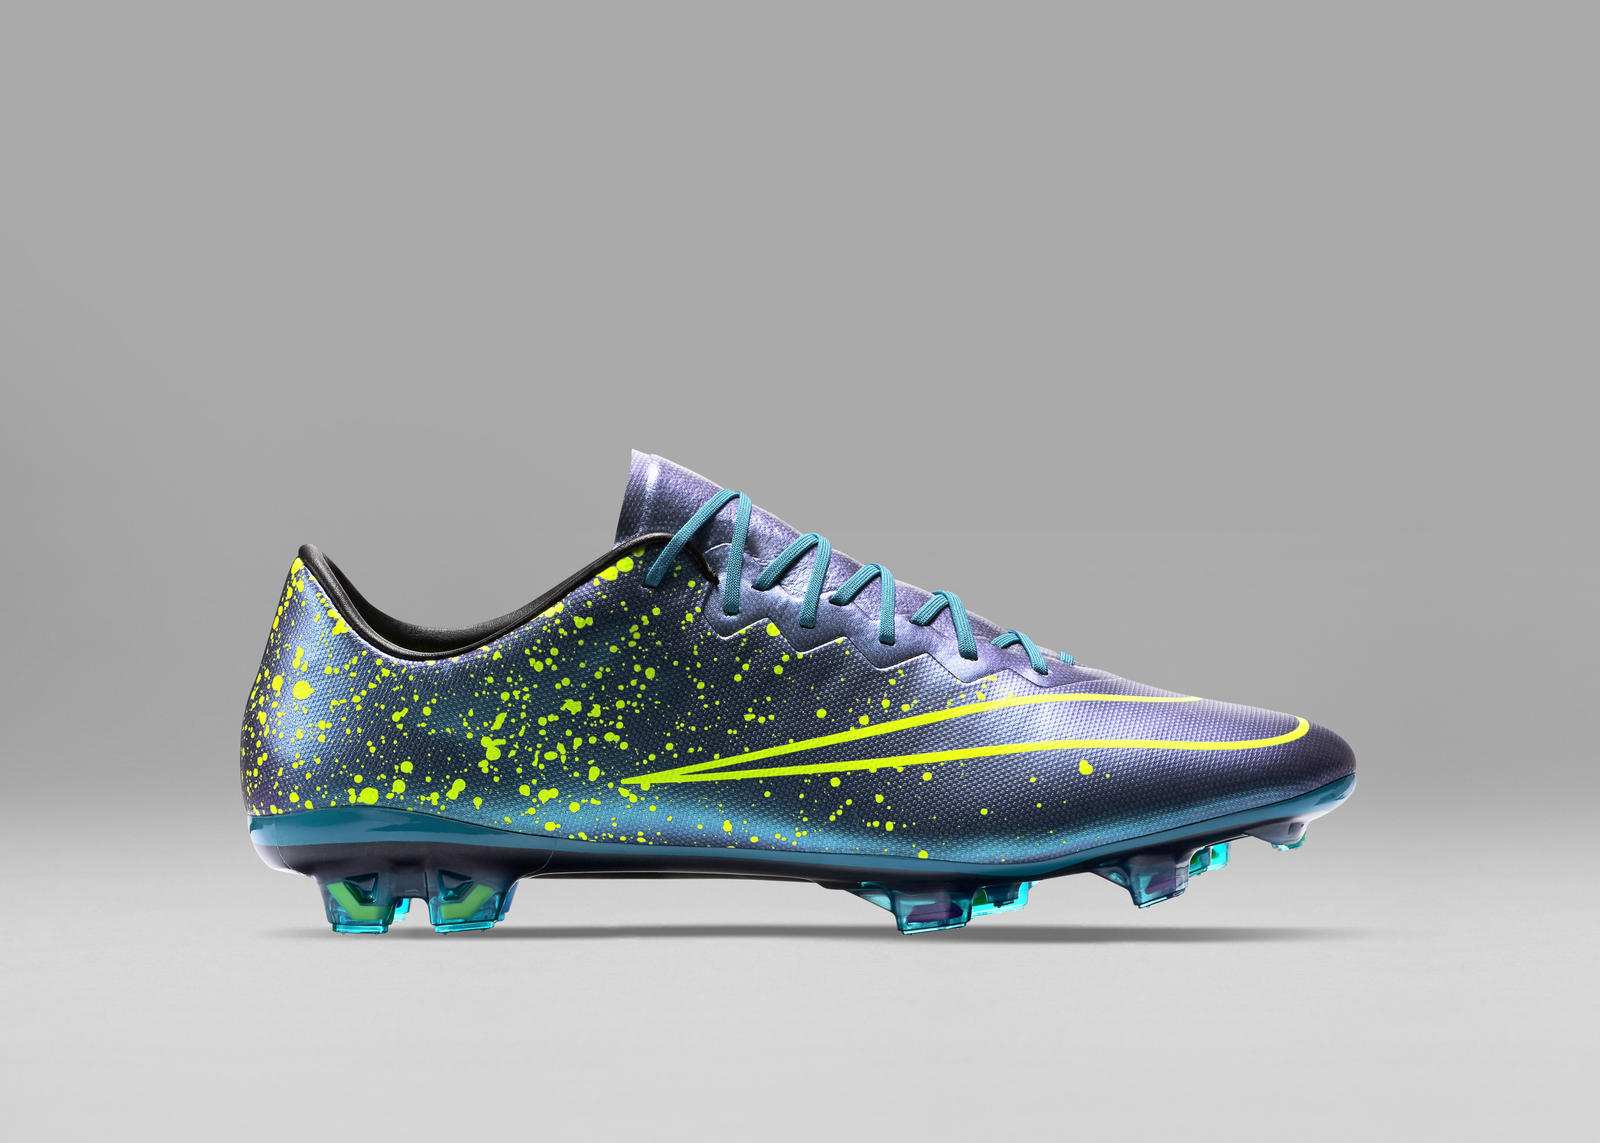 Super Punch: "Nike Football introduces the Electro Flare Pack with a